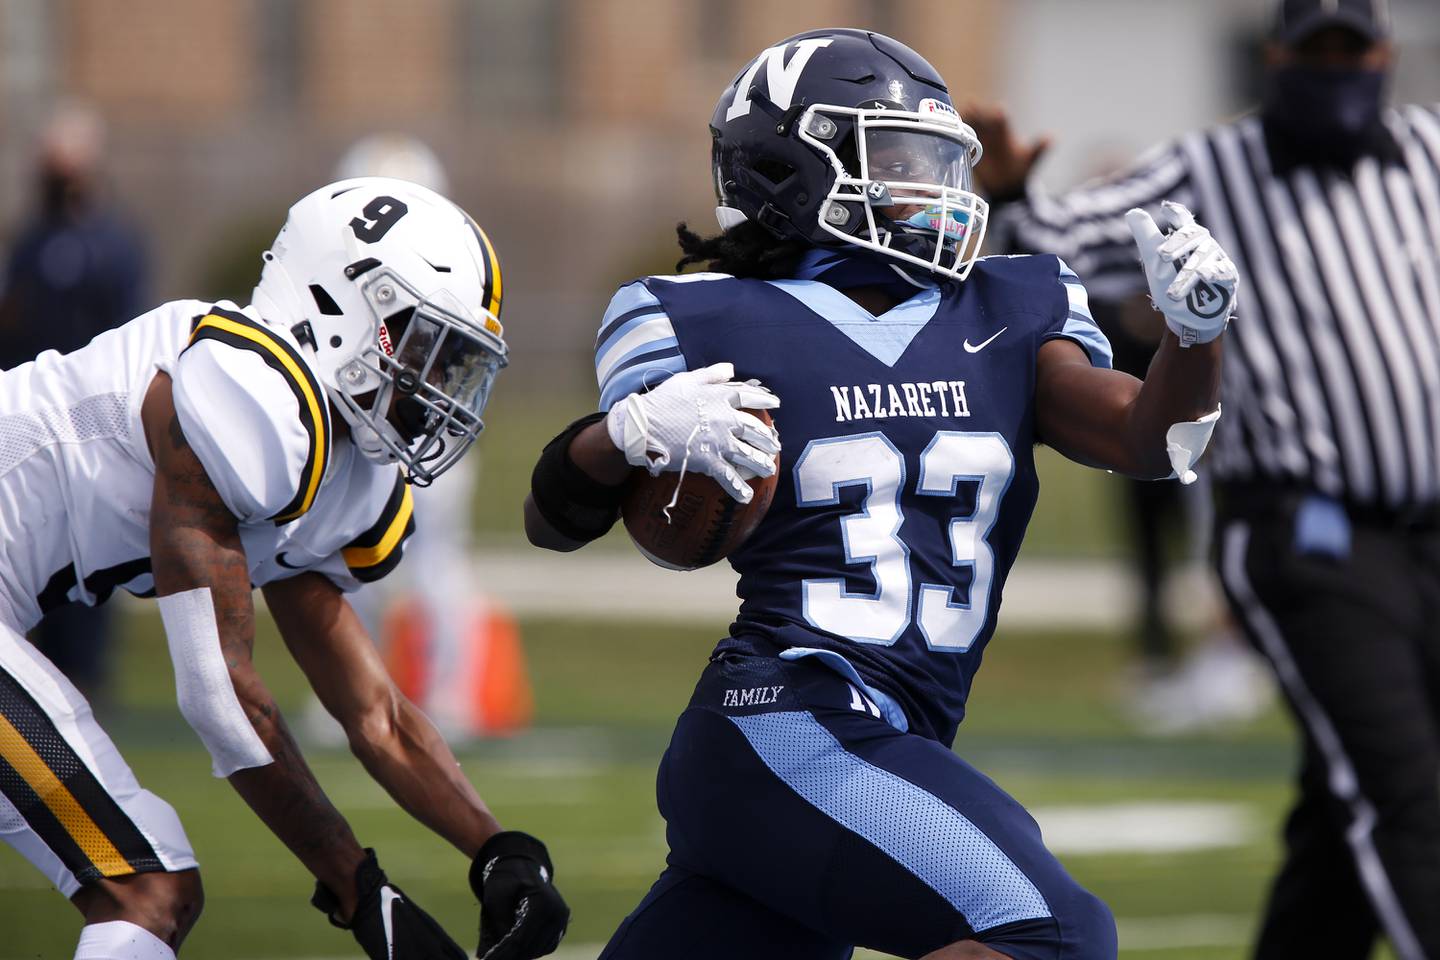 Nazareth’s Patrick Oden (right) gets past St. Laurence’s  and runs toward the end zone Aaron Wofford during their football game at Nazareth Academy in LaGrange Park, Ill., on Saturday, March 27, 2021.